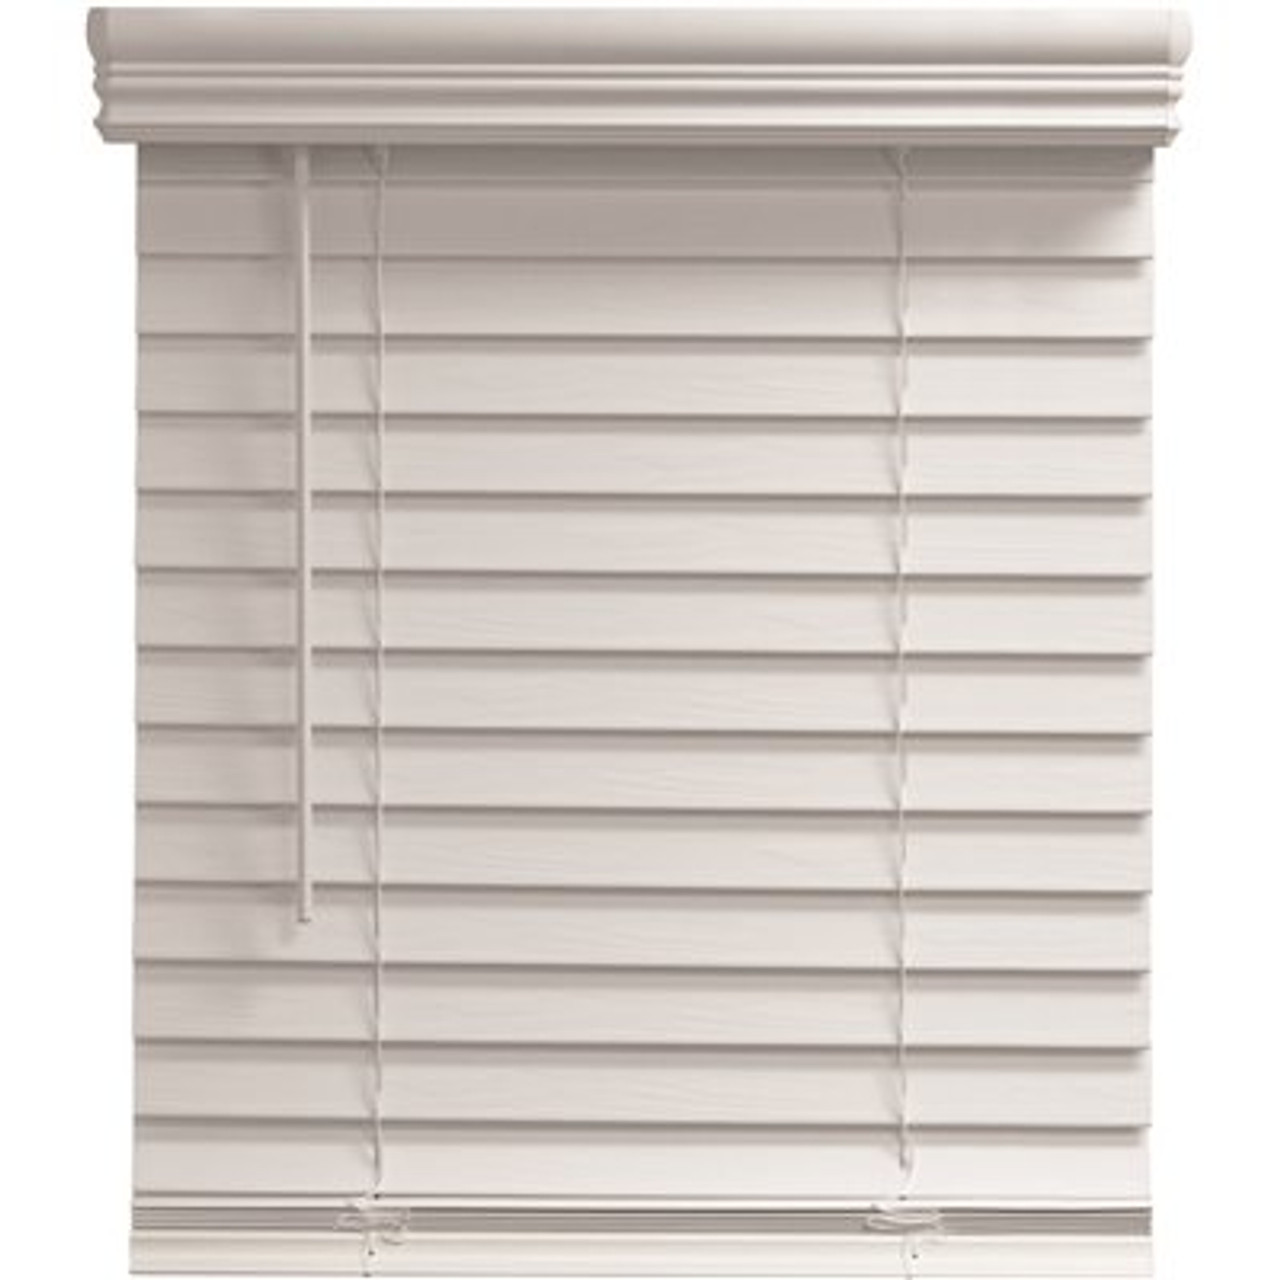 Pre-Cut 32 in. W x 60 in. L White Cordless Room Darkening Faux Wood Blinds with 2 in. Slats